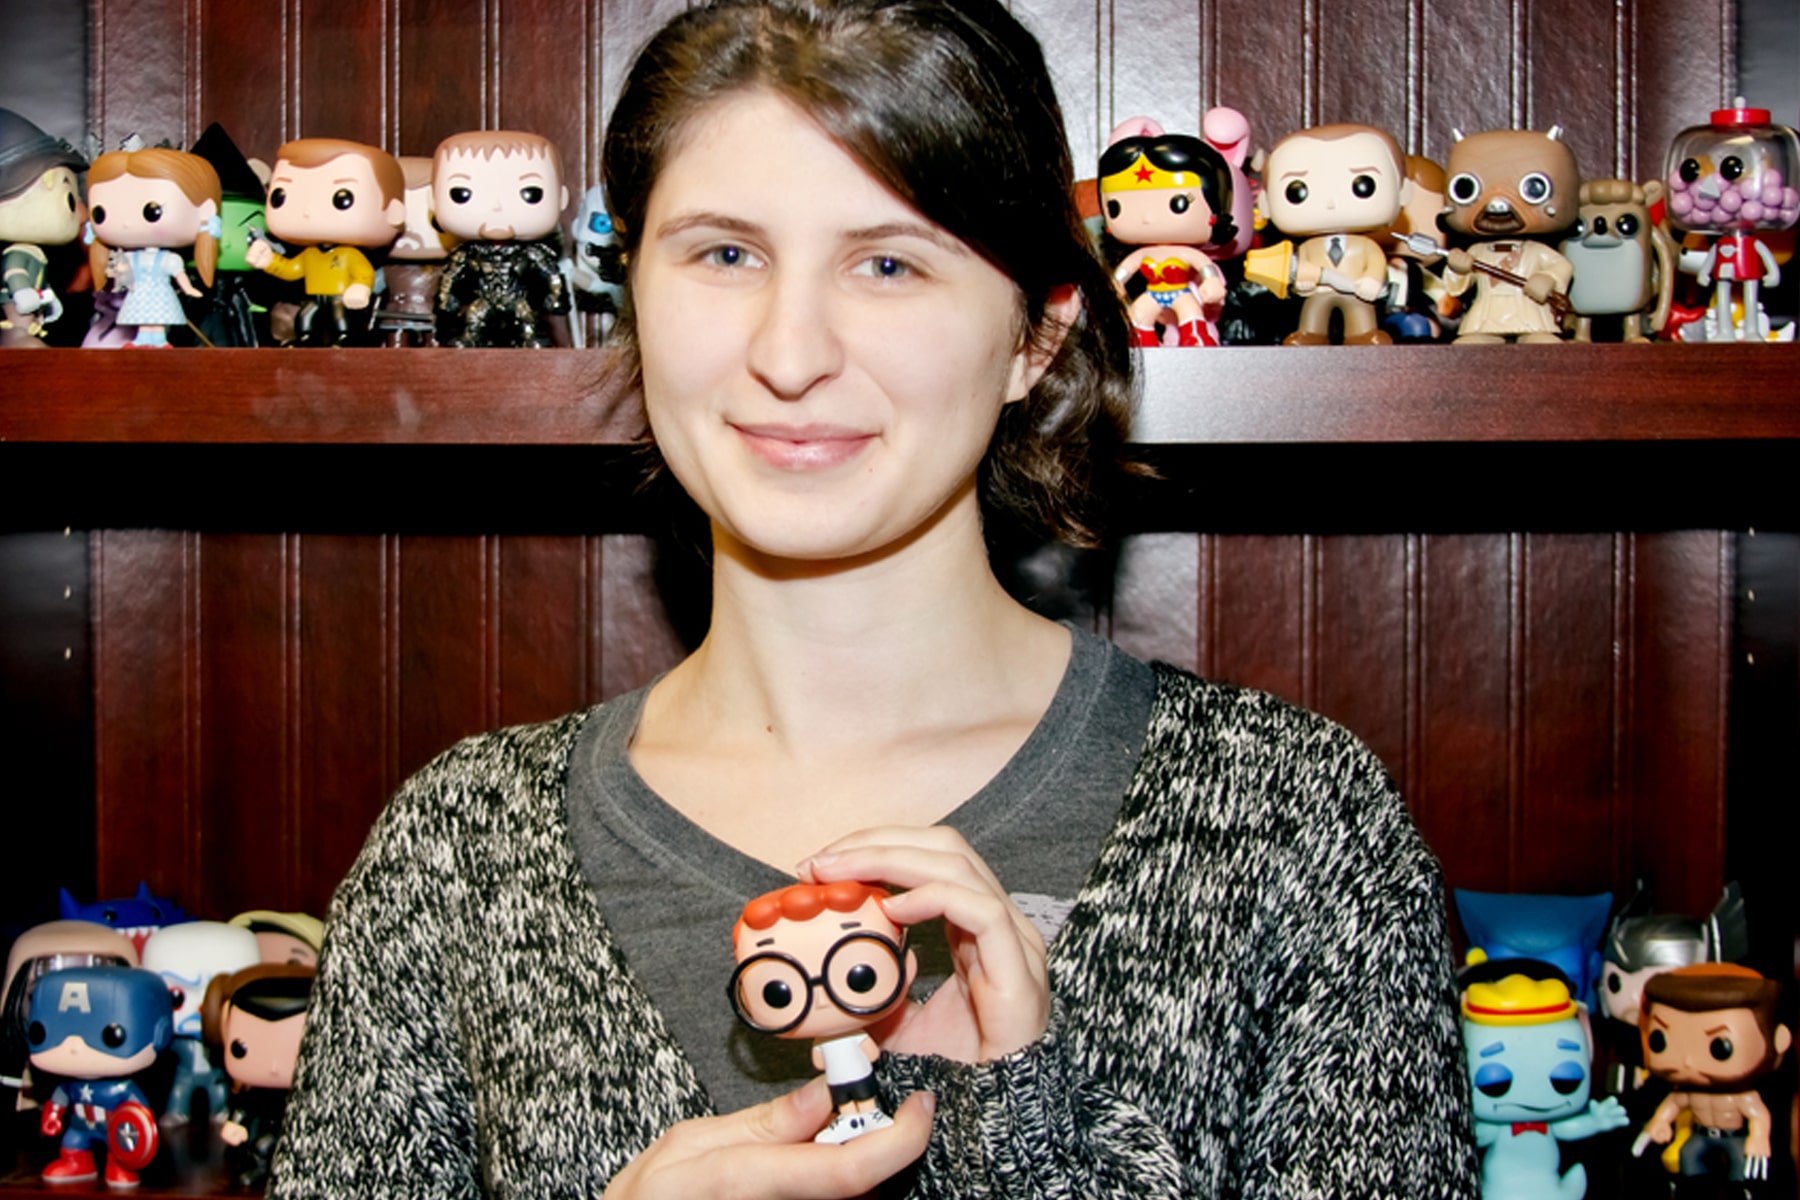 DigiPen BFA graduate Anna Chiknavaryan holding the finished Mr. Peabody and Sherman figurine she sculpted on the computer